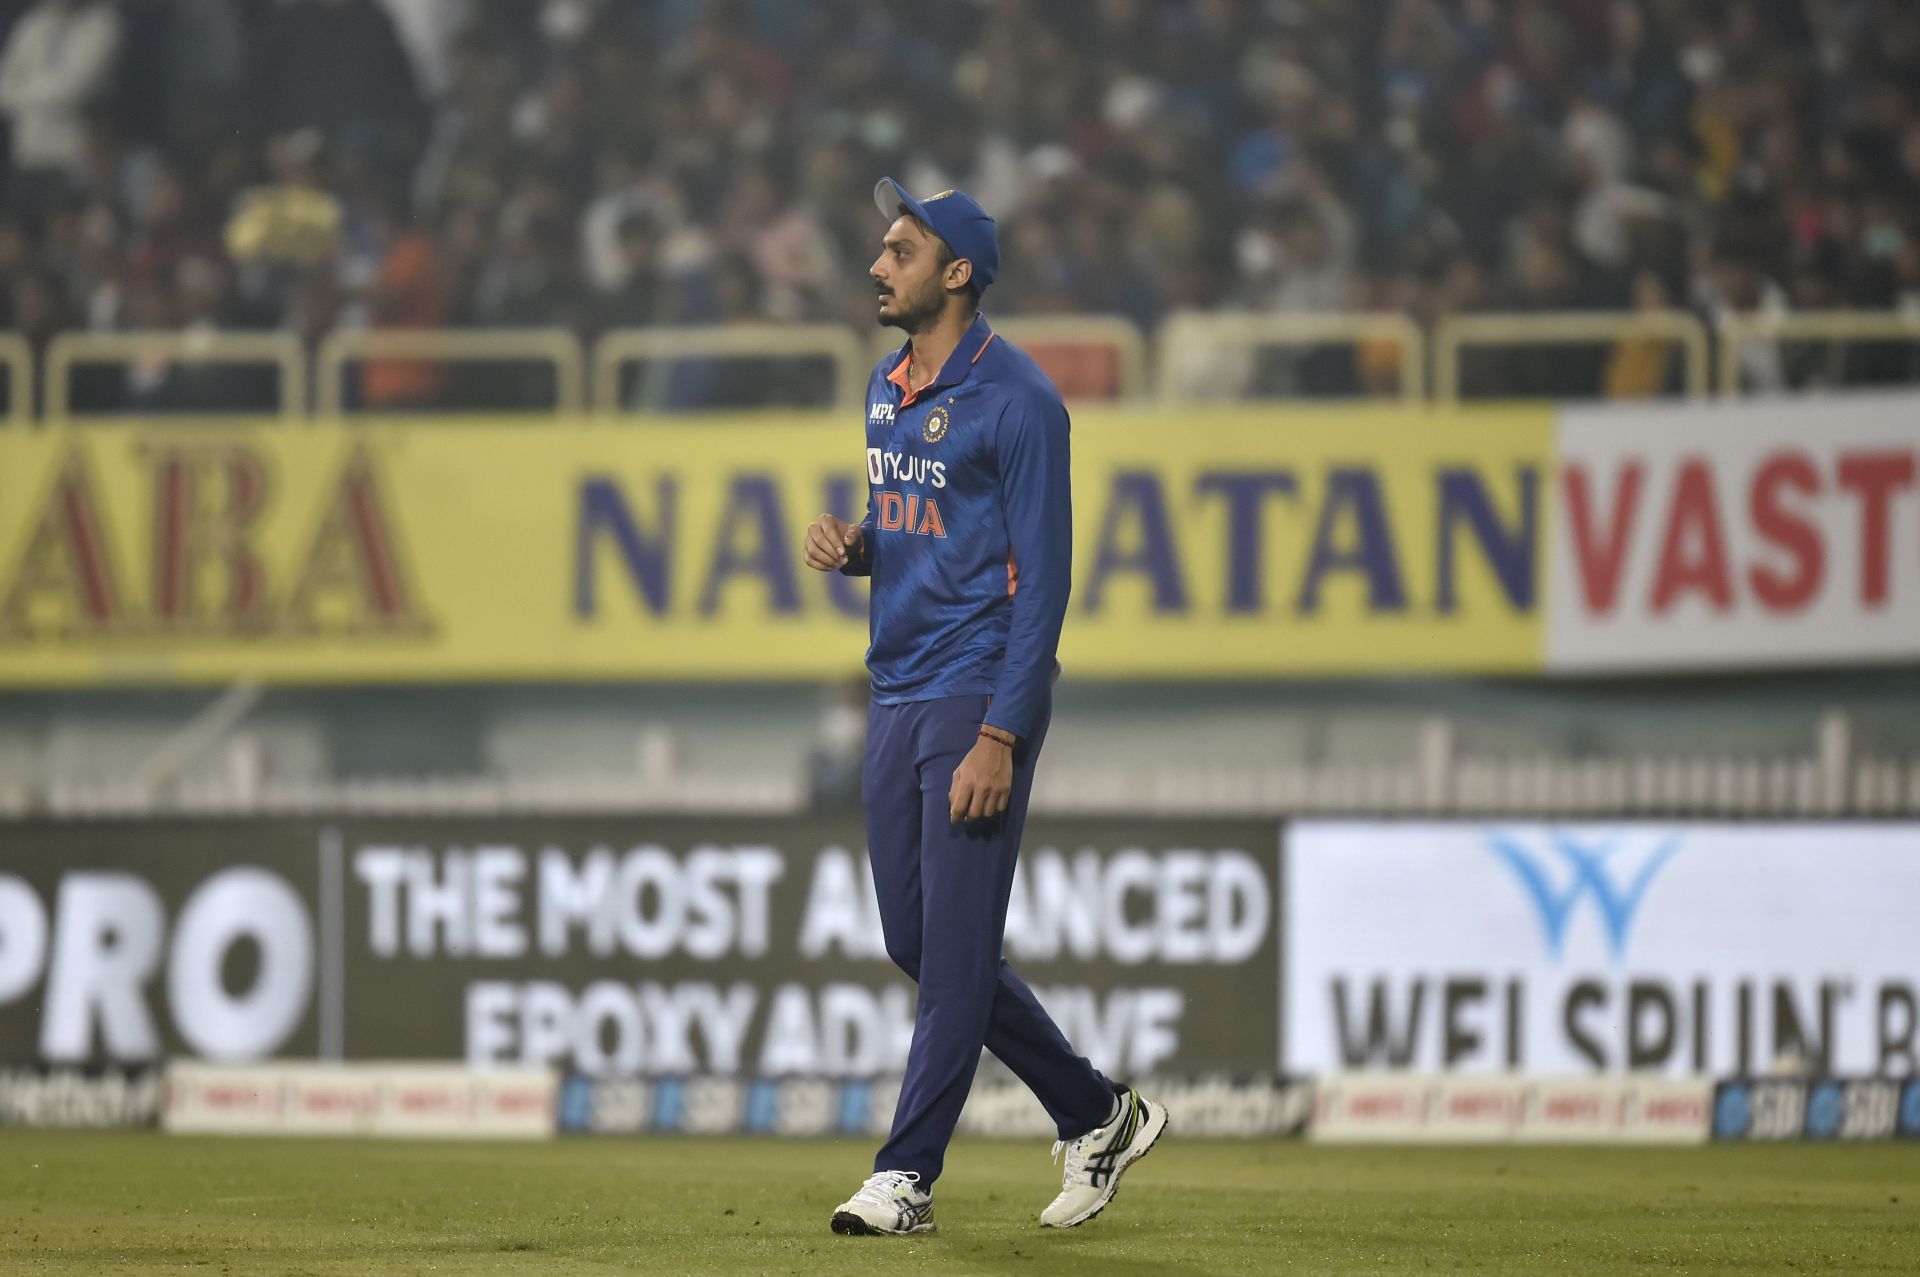 Axar Patel has played 26 T20I matches for India. (Image: Getty)